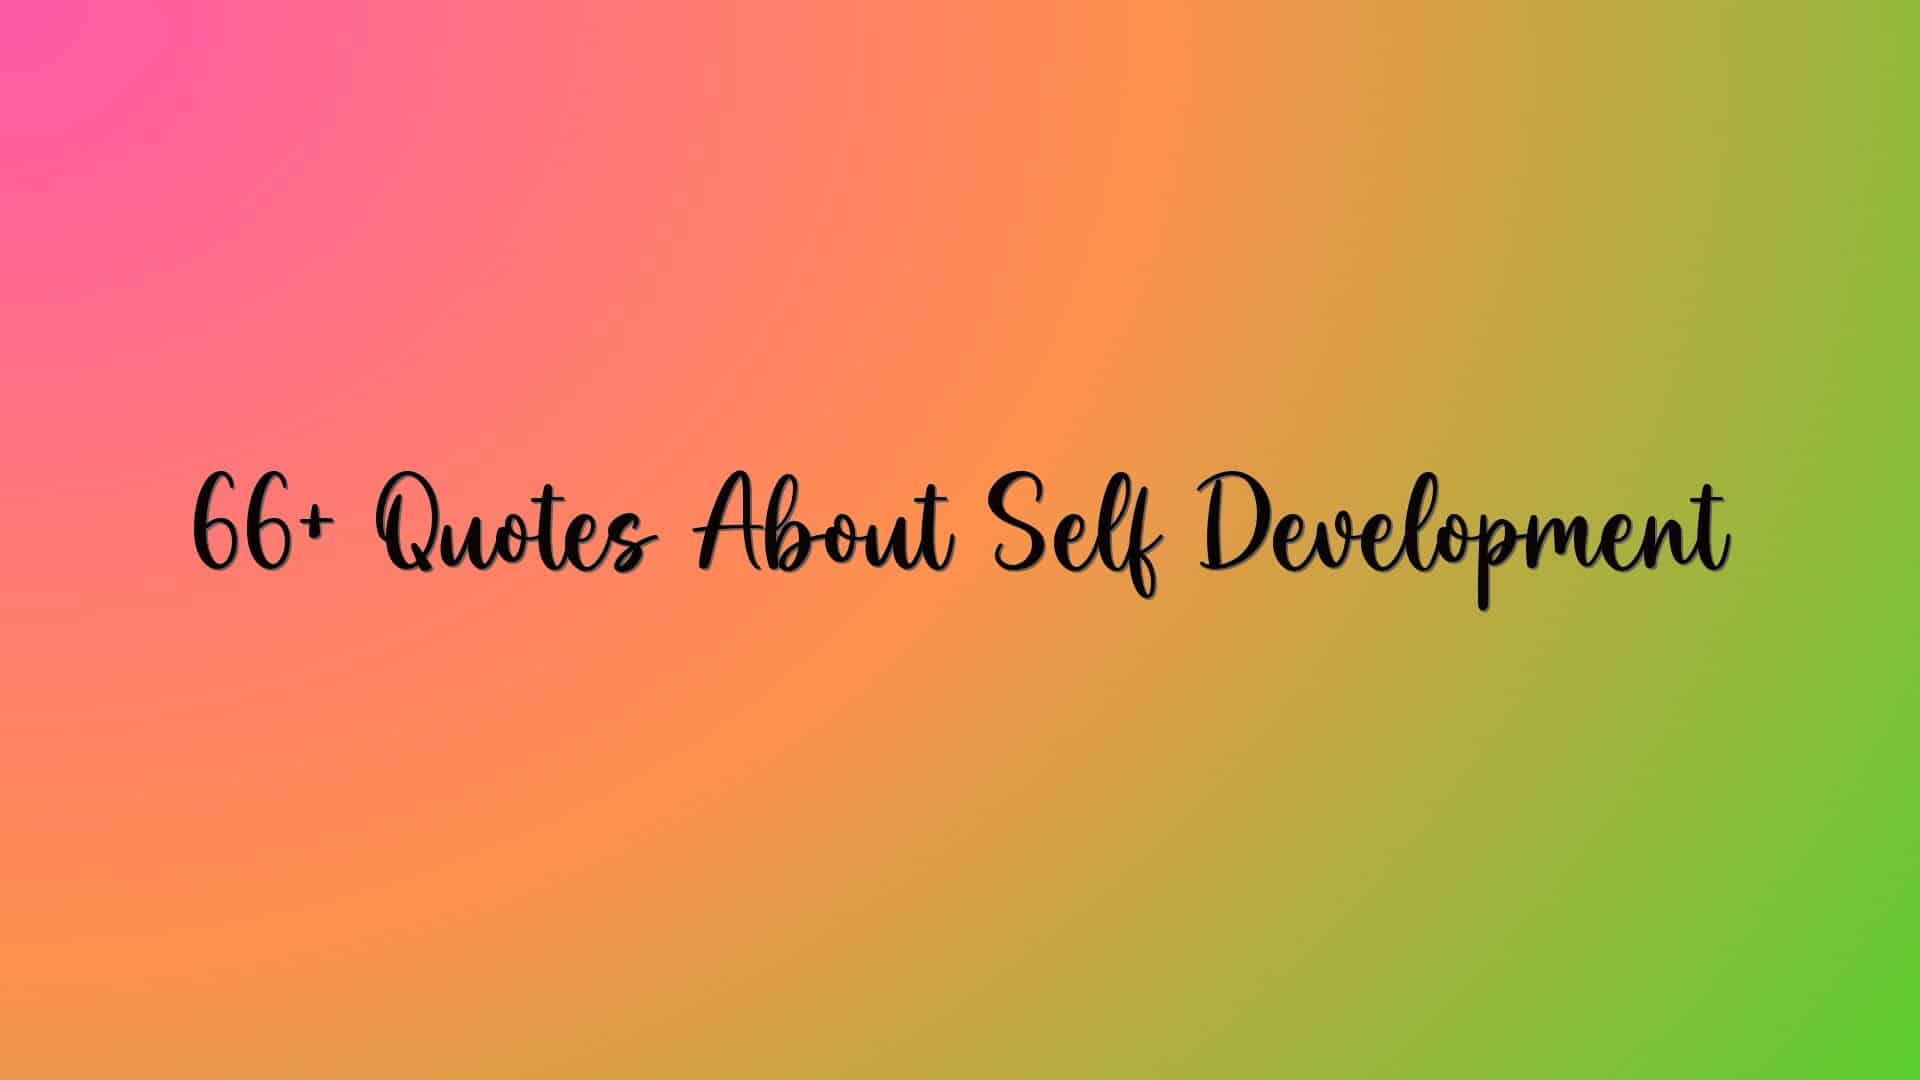 66+ Quotes About Self Development